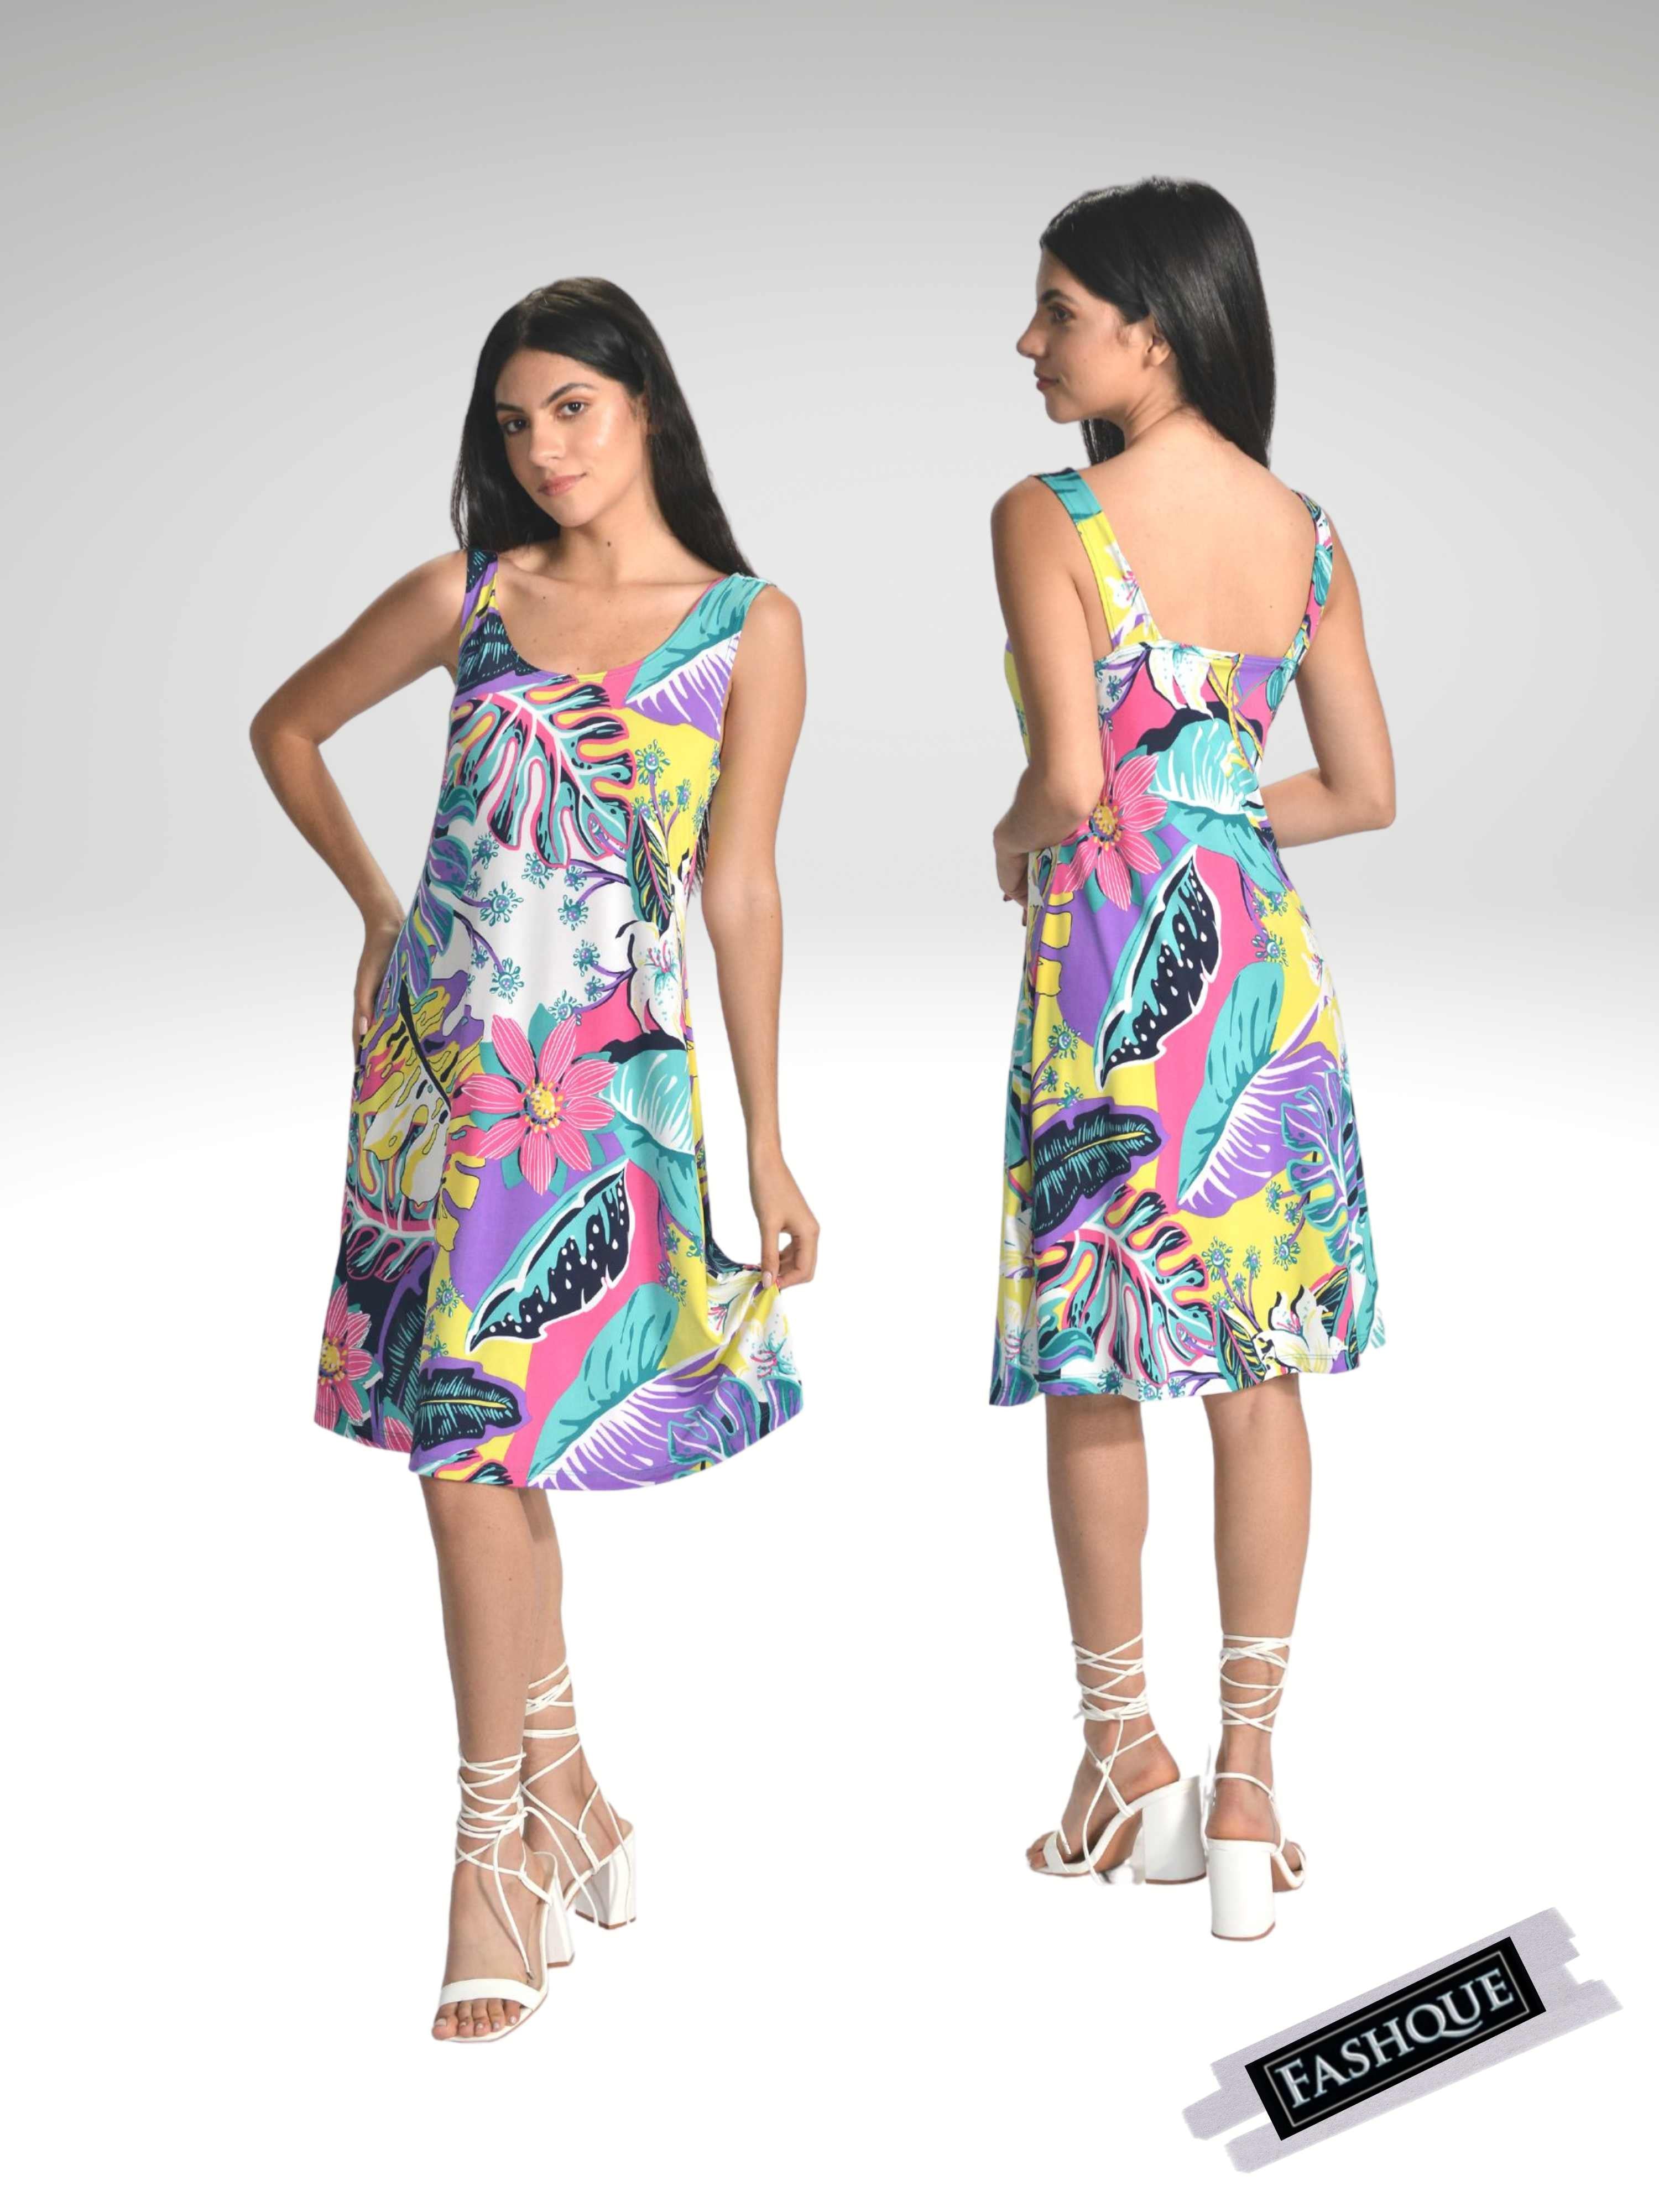 FASHQUE - SUNDRESS - Skater Style tank dress with square back  - D001 SALE